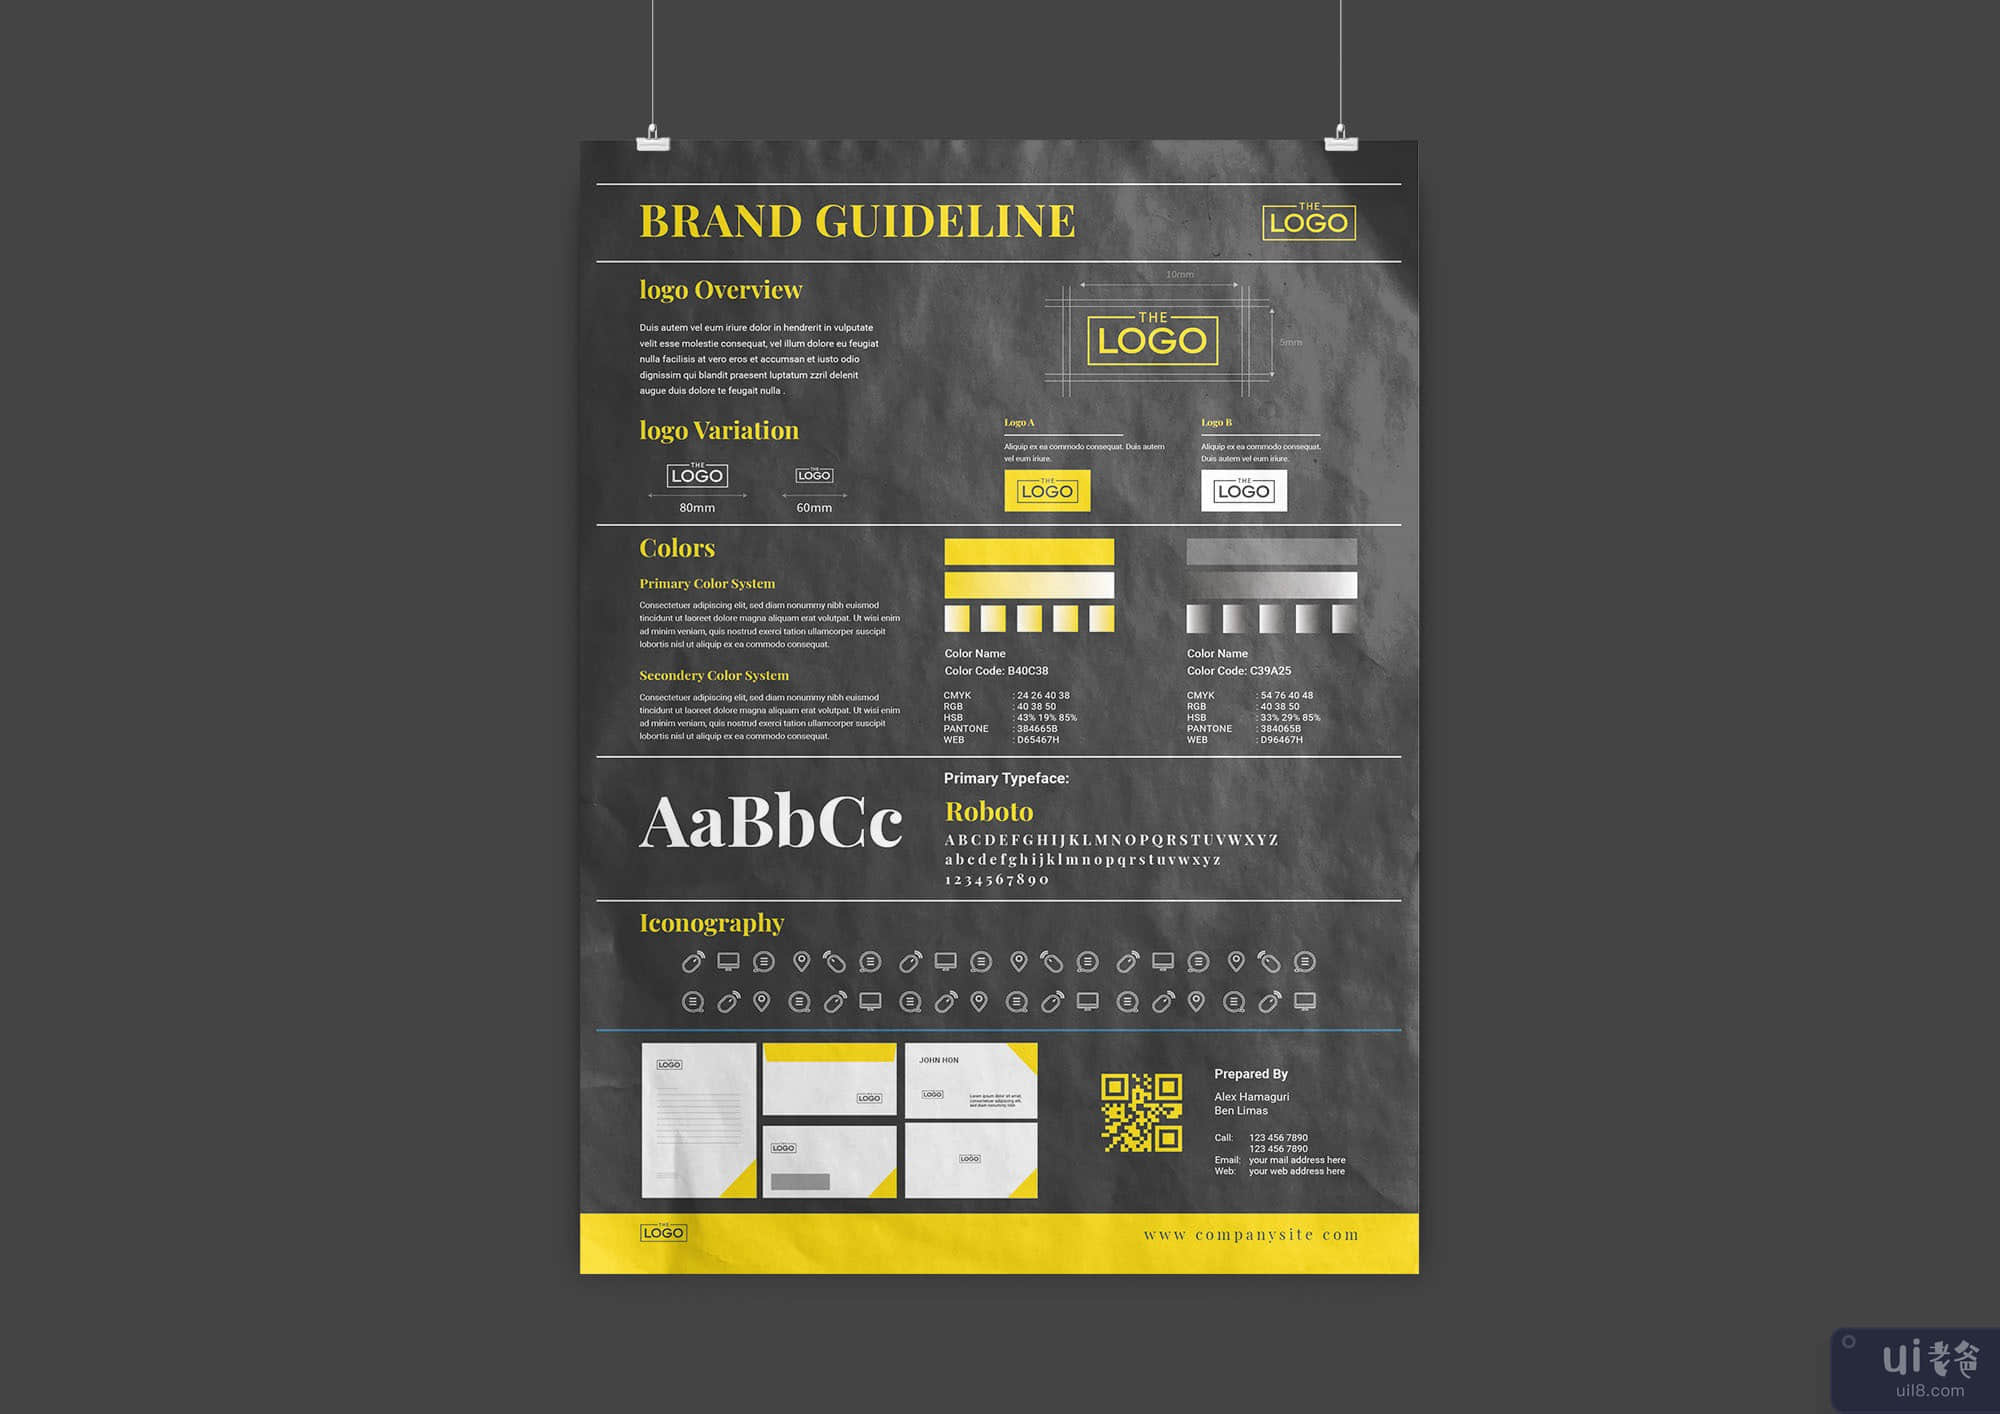 A3 品牌指南海报 Din A3 品牌指南海报(A3 Brand Guideline poster Din A3 Brand Guideline poster)插图3